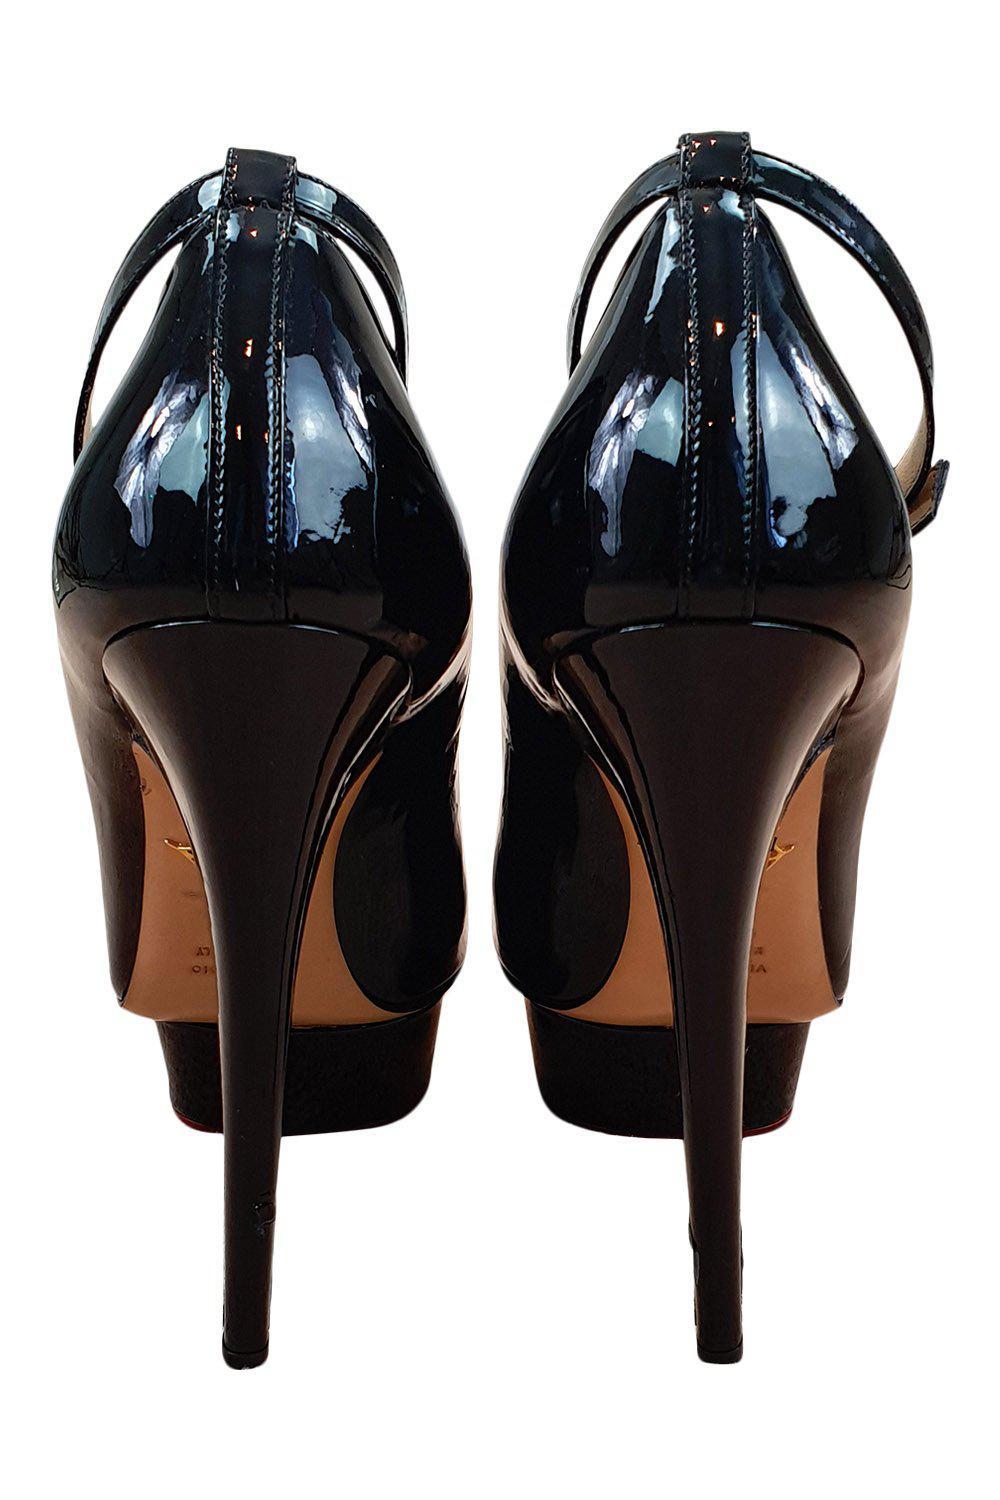 CHARLOTTE OLYMPIA Black Patent Leather Platform Stiletto Dolly Pumps (39.5)-Charlotte Olympia-The Freperie